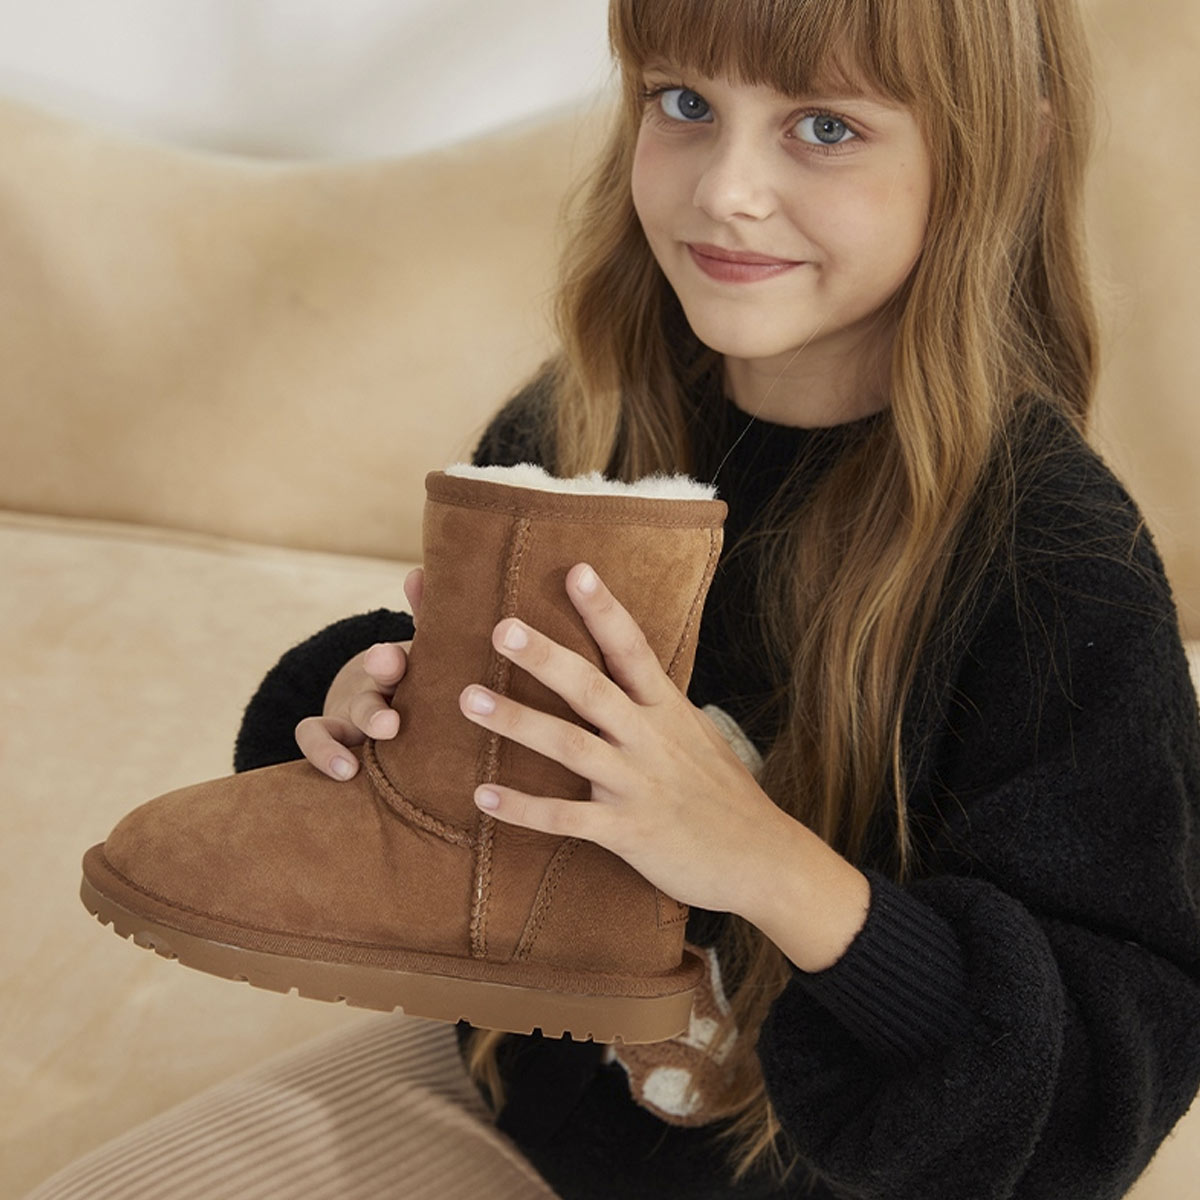 Girl Holding UGG Boots